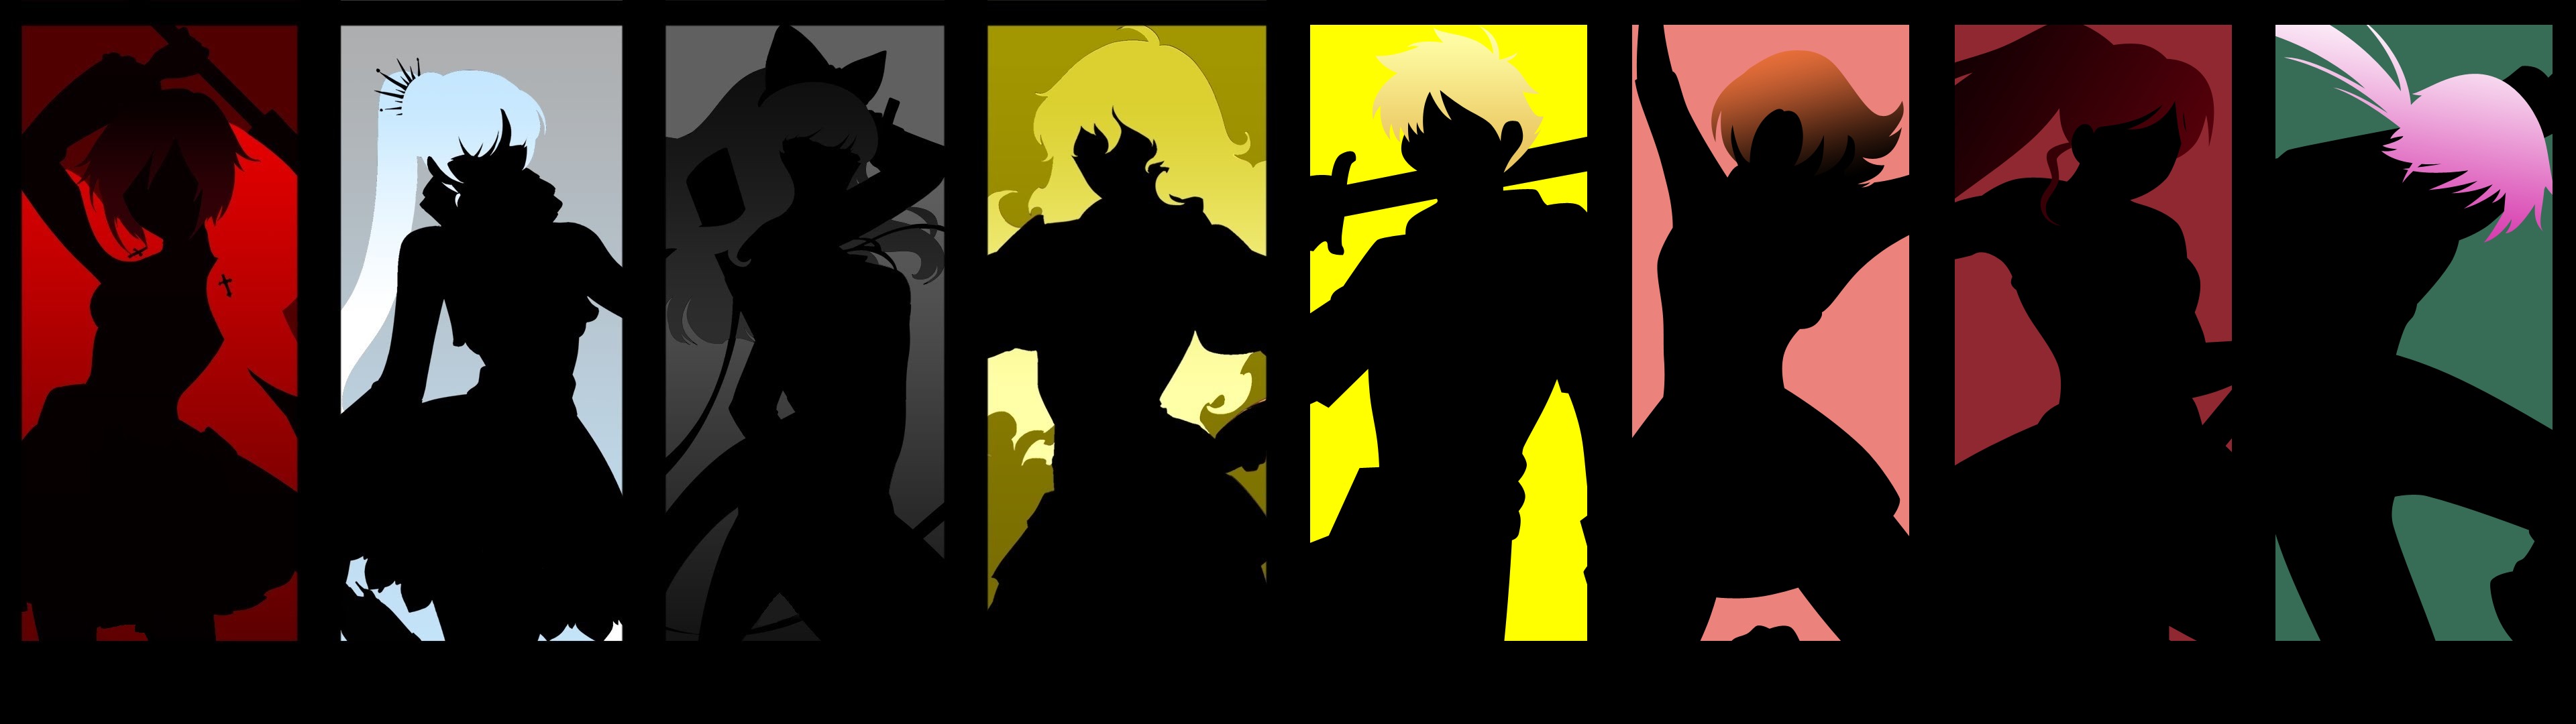 RWBY Character Silhouettes